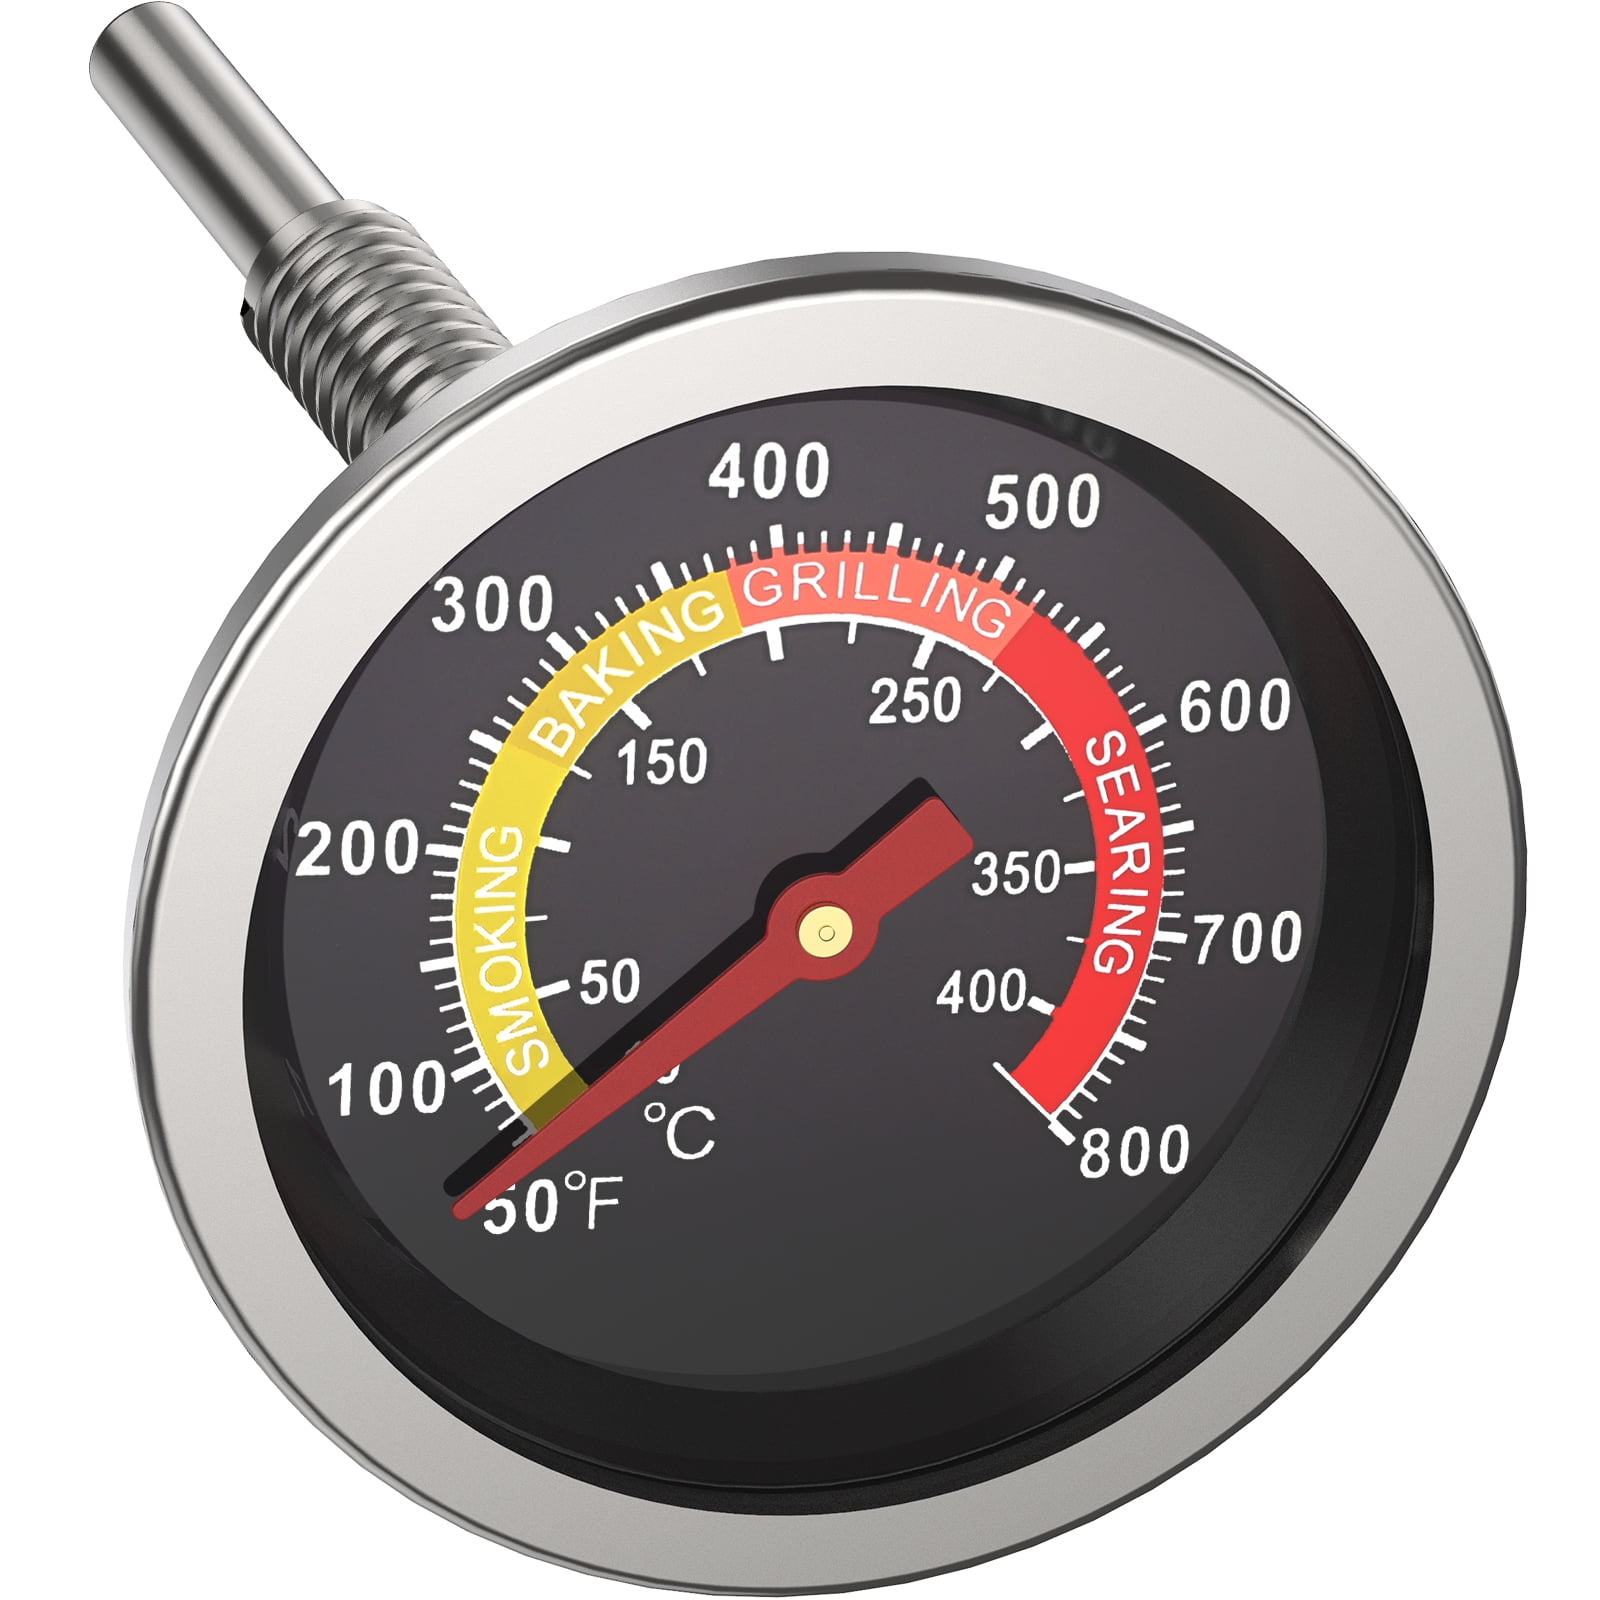 Portable BBQ Smoker Grill Stainless Steel Thermometer Temperature Gauge 10-400℃